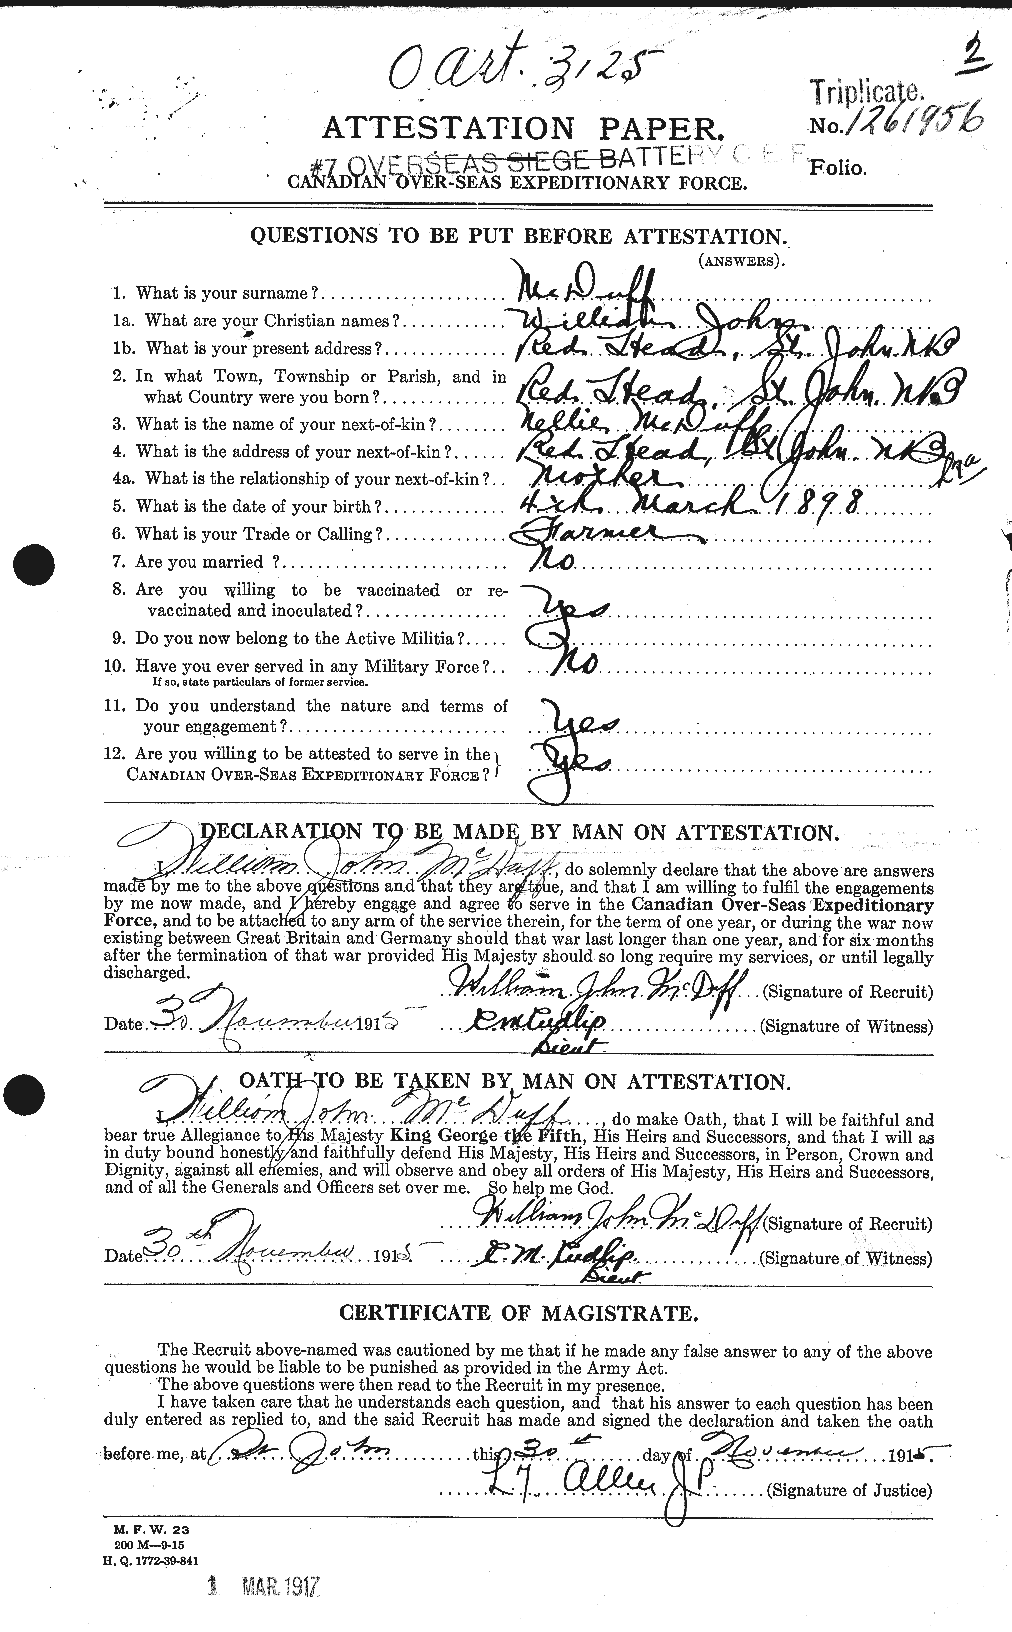 Personnel Records of the First World War - CEF 520759a